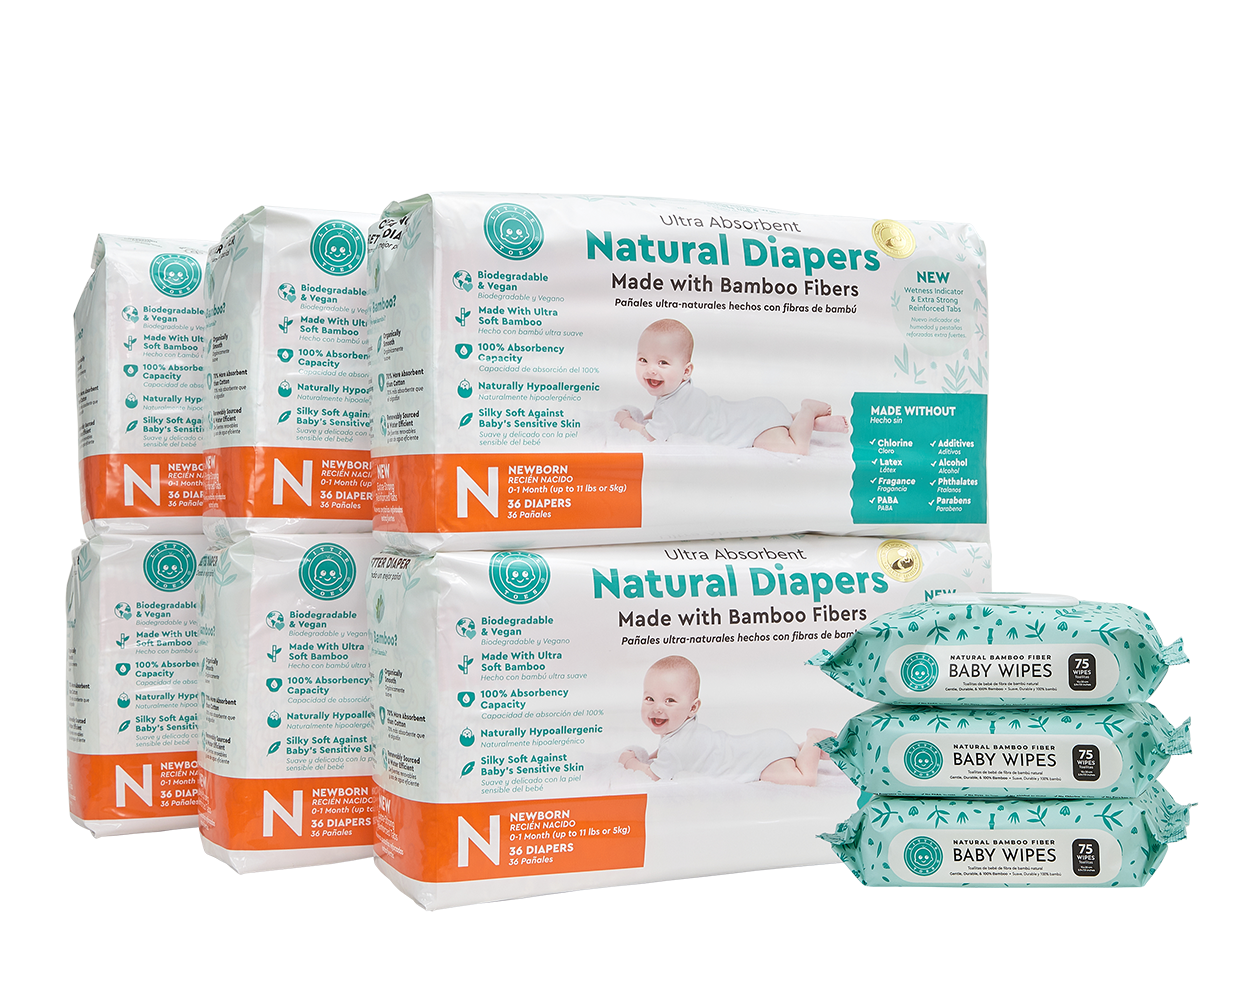 Little Toes Disposable Biodegradable Bamboo Diapers 216 Packs NEWBORN Monthly Subscription Pack